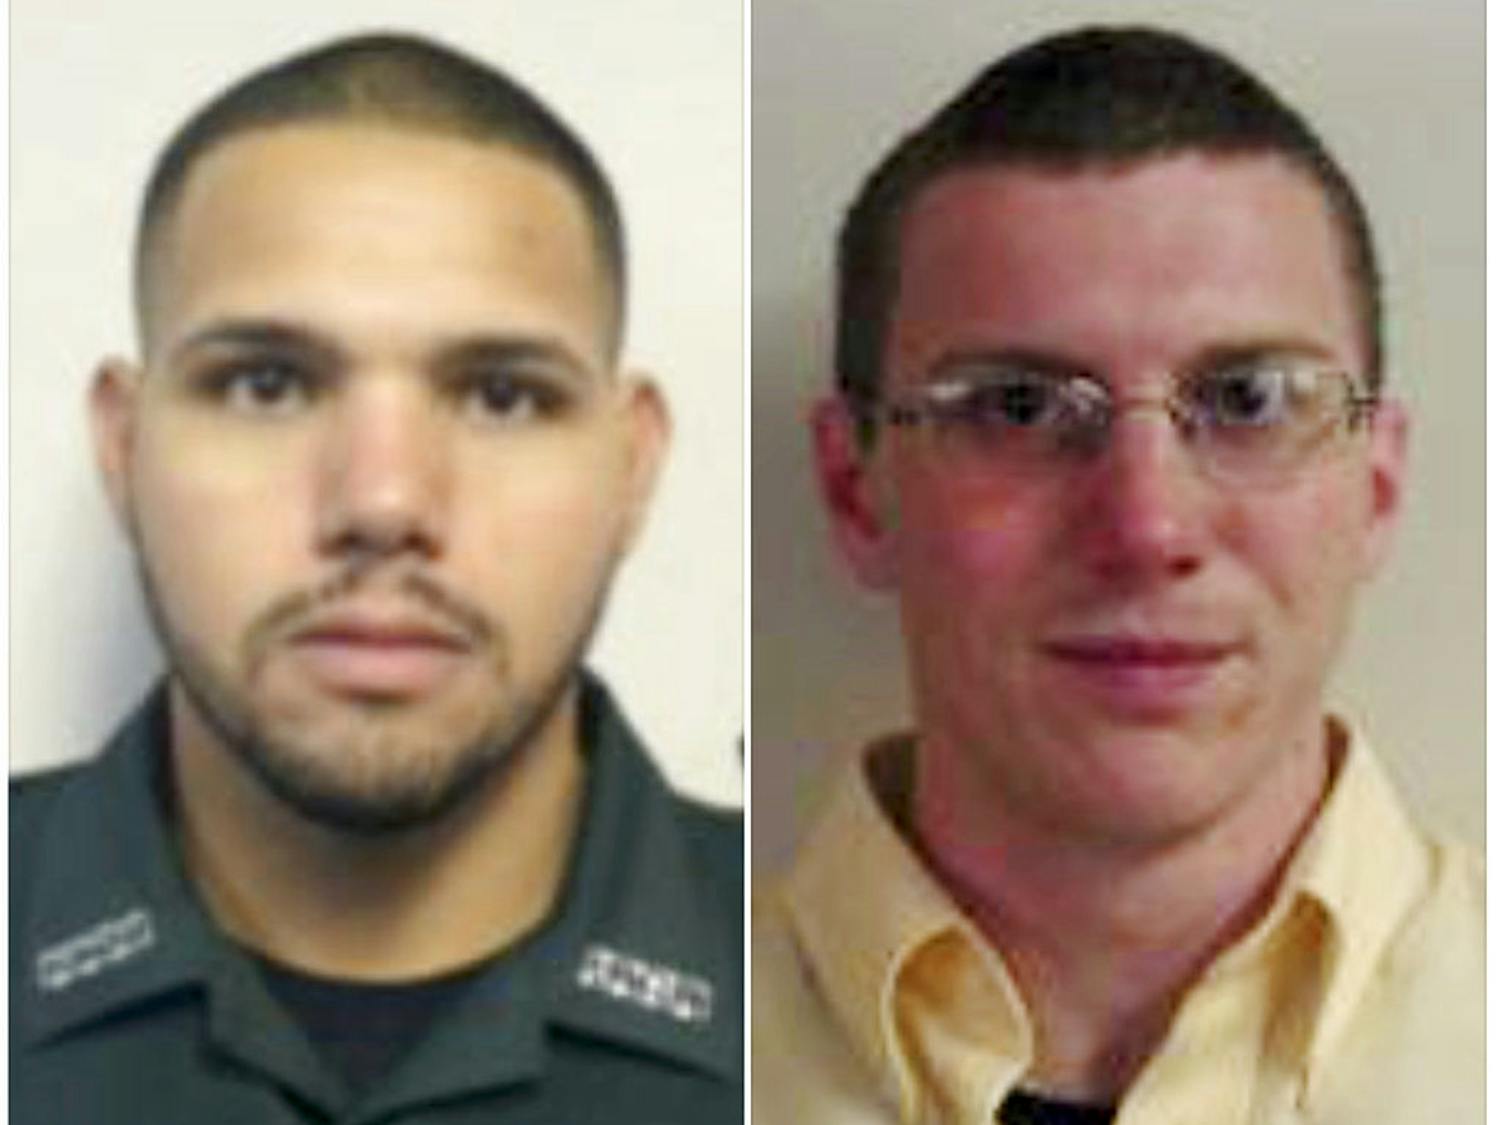 These undated photos made available by the Gilchrist County Sheriff's Office shows Sgt. Noel Ramirez, left, and Deputy Taylor Lindsey. Authorities say the two Florida sheriff's deputies were shot dead, Thursday, April 19, 2018, through the window of a Chinese restaurant in Gilchrist, Fla., by a man who then killed himself.&nbsp;